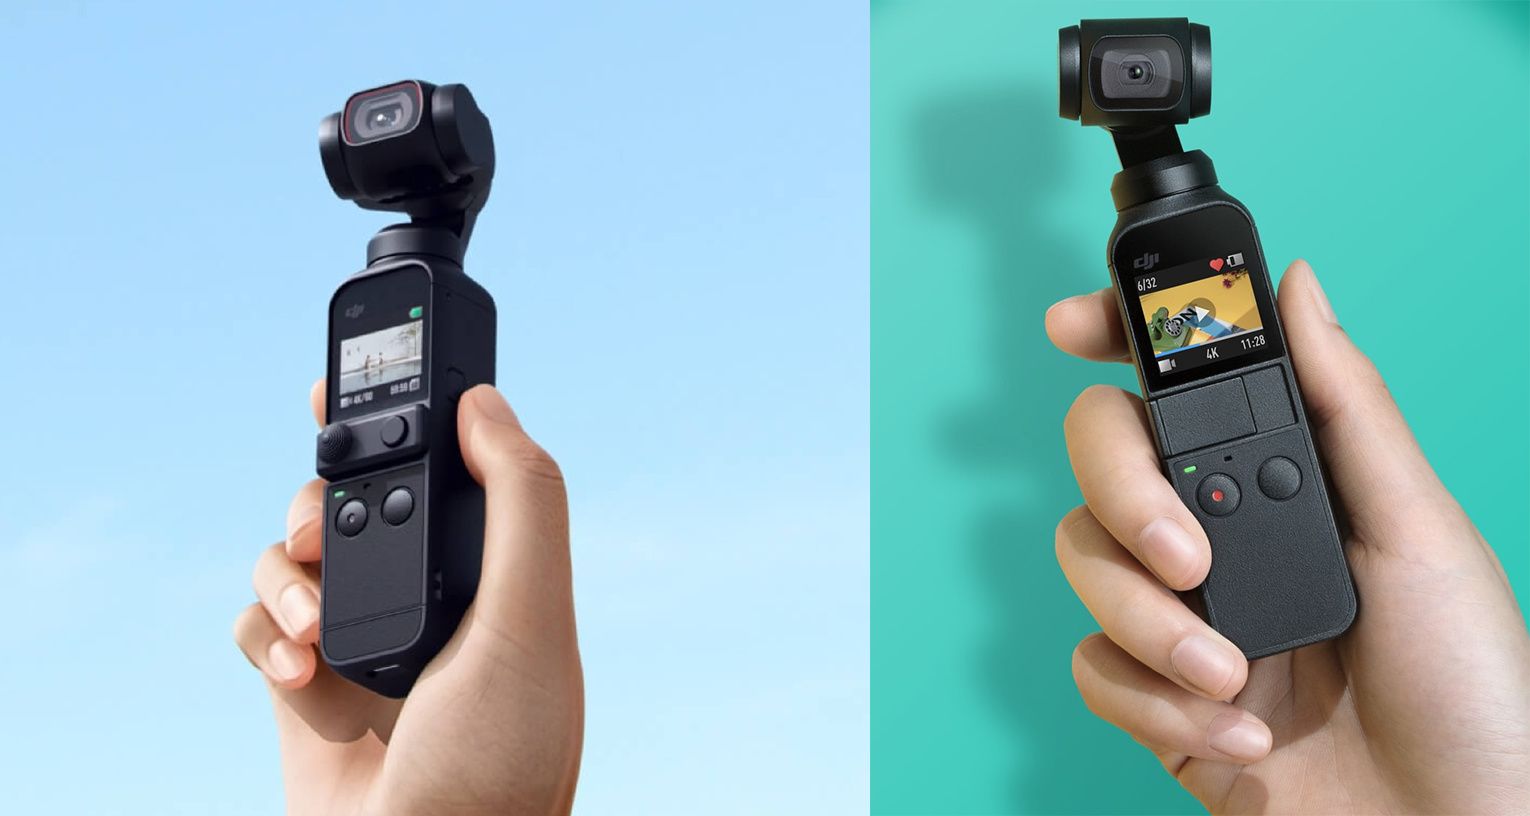 The new DJI Pocket 2 (left) and original Osmo Pocket (right)